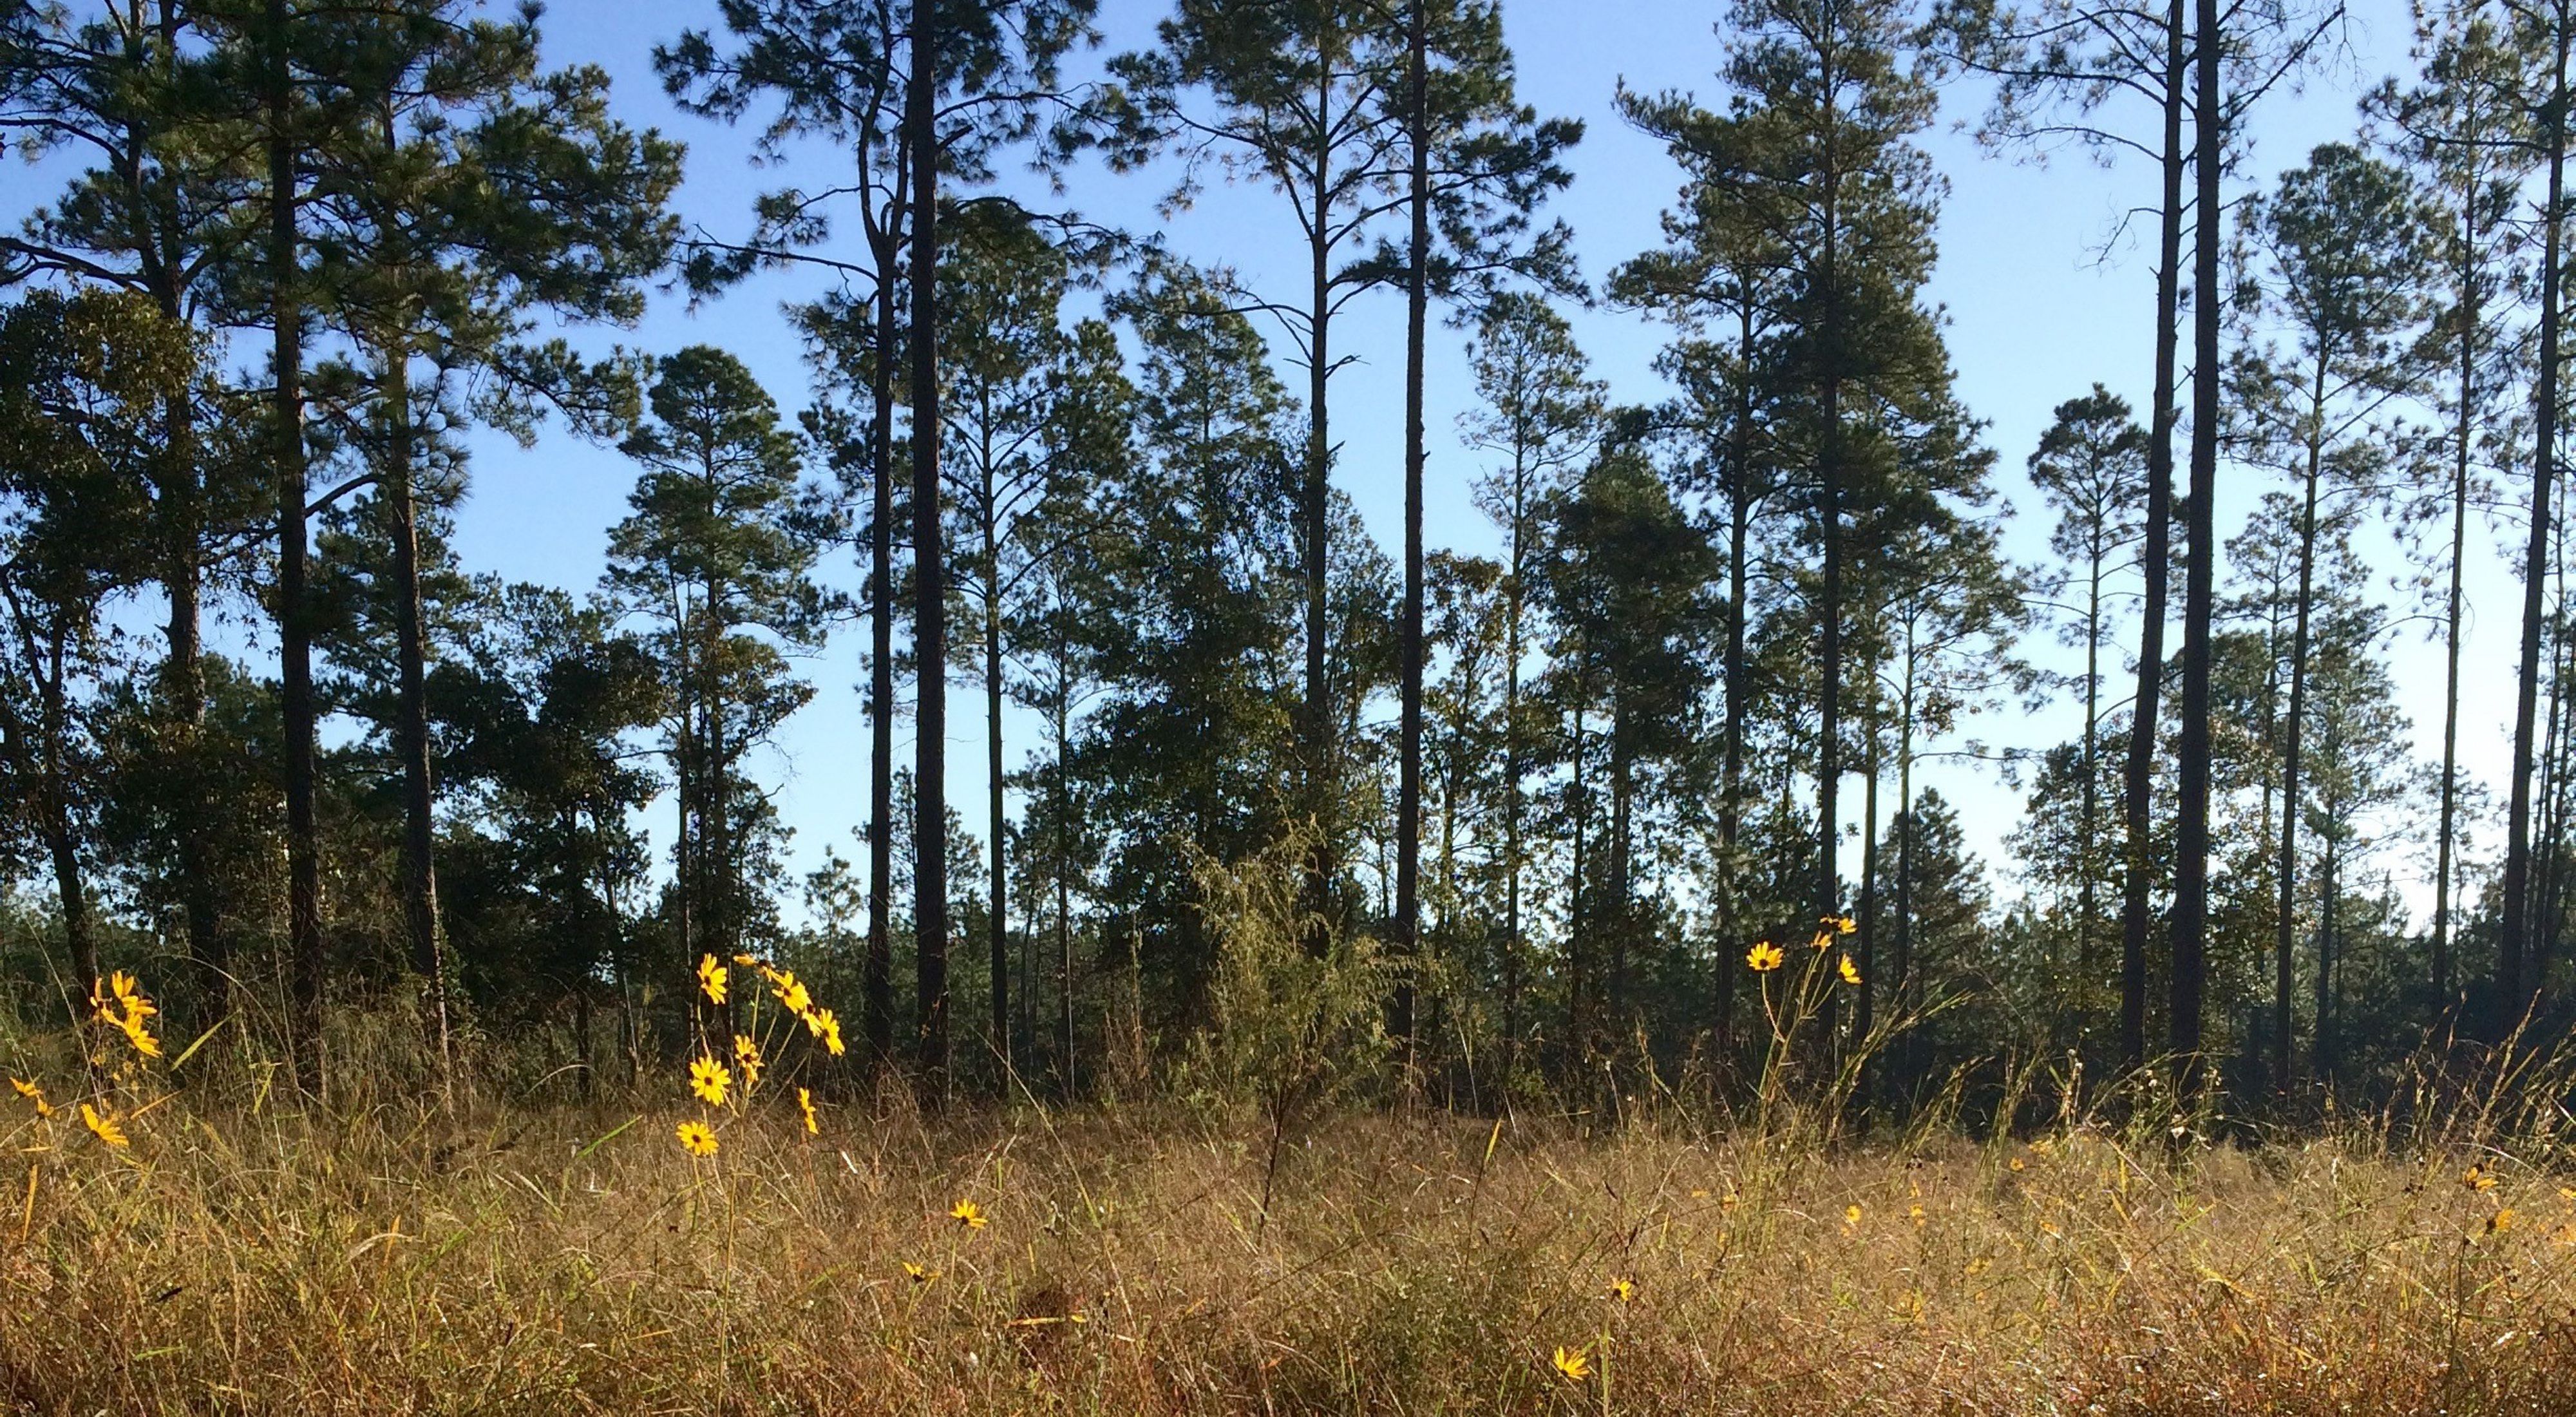 Yellow flowers emerge from grasses growing near a forest of tall trees.